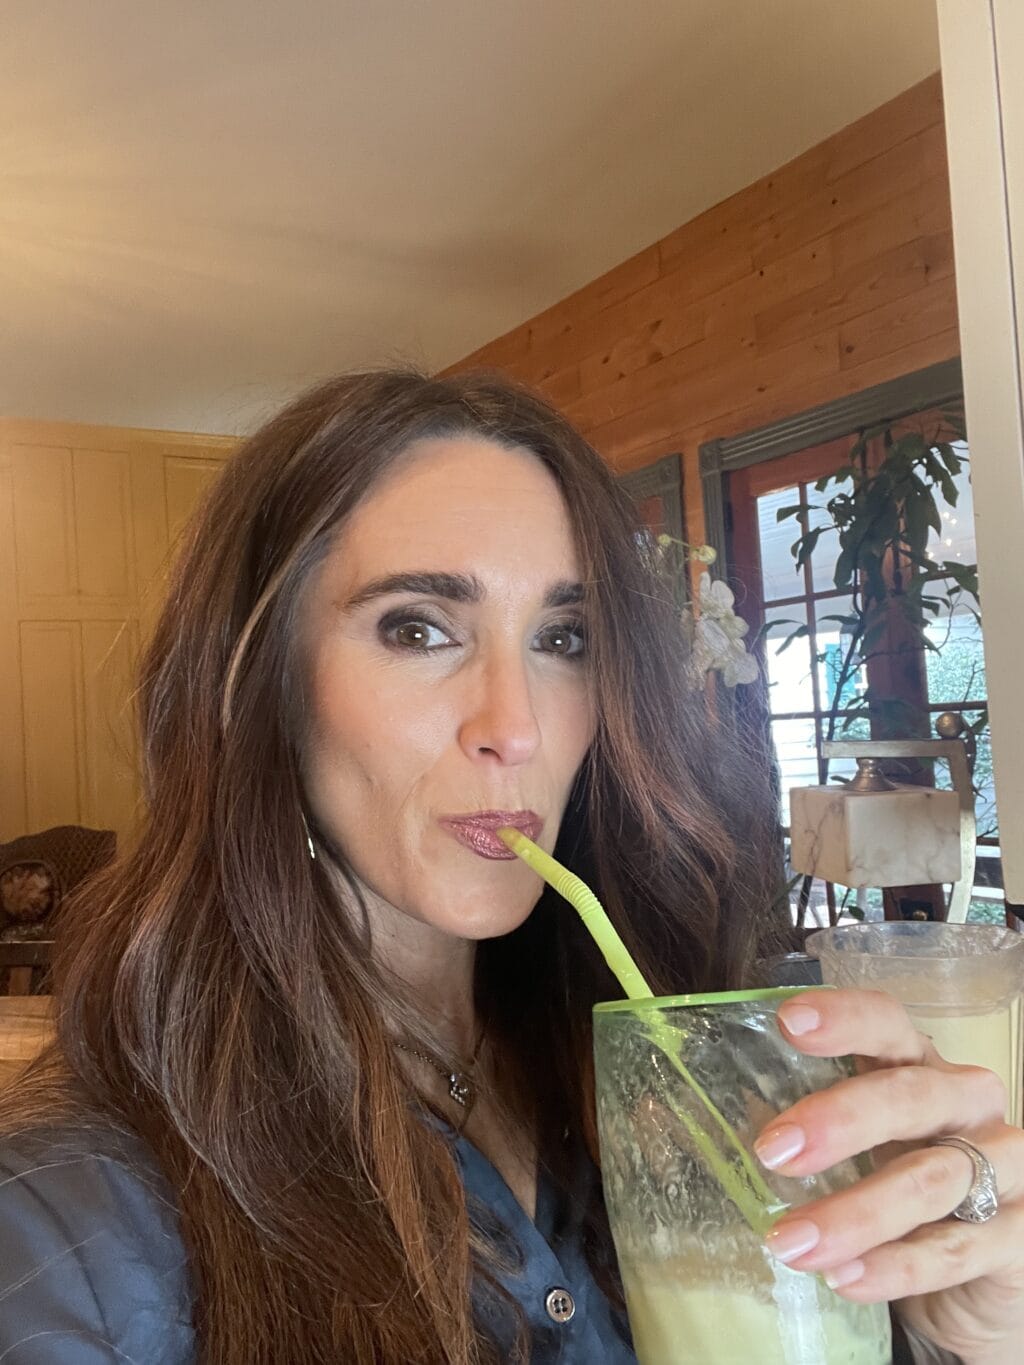 Stacy Lyn drinking a homemade orange julius smoothie with a straw